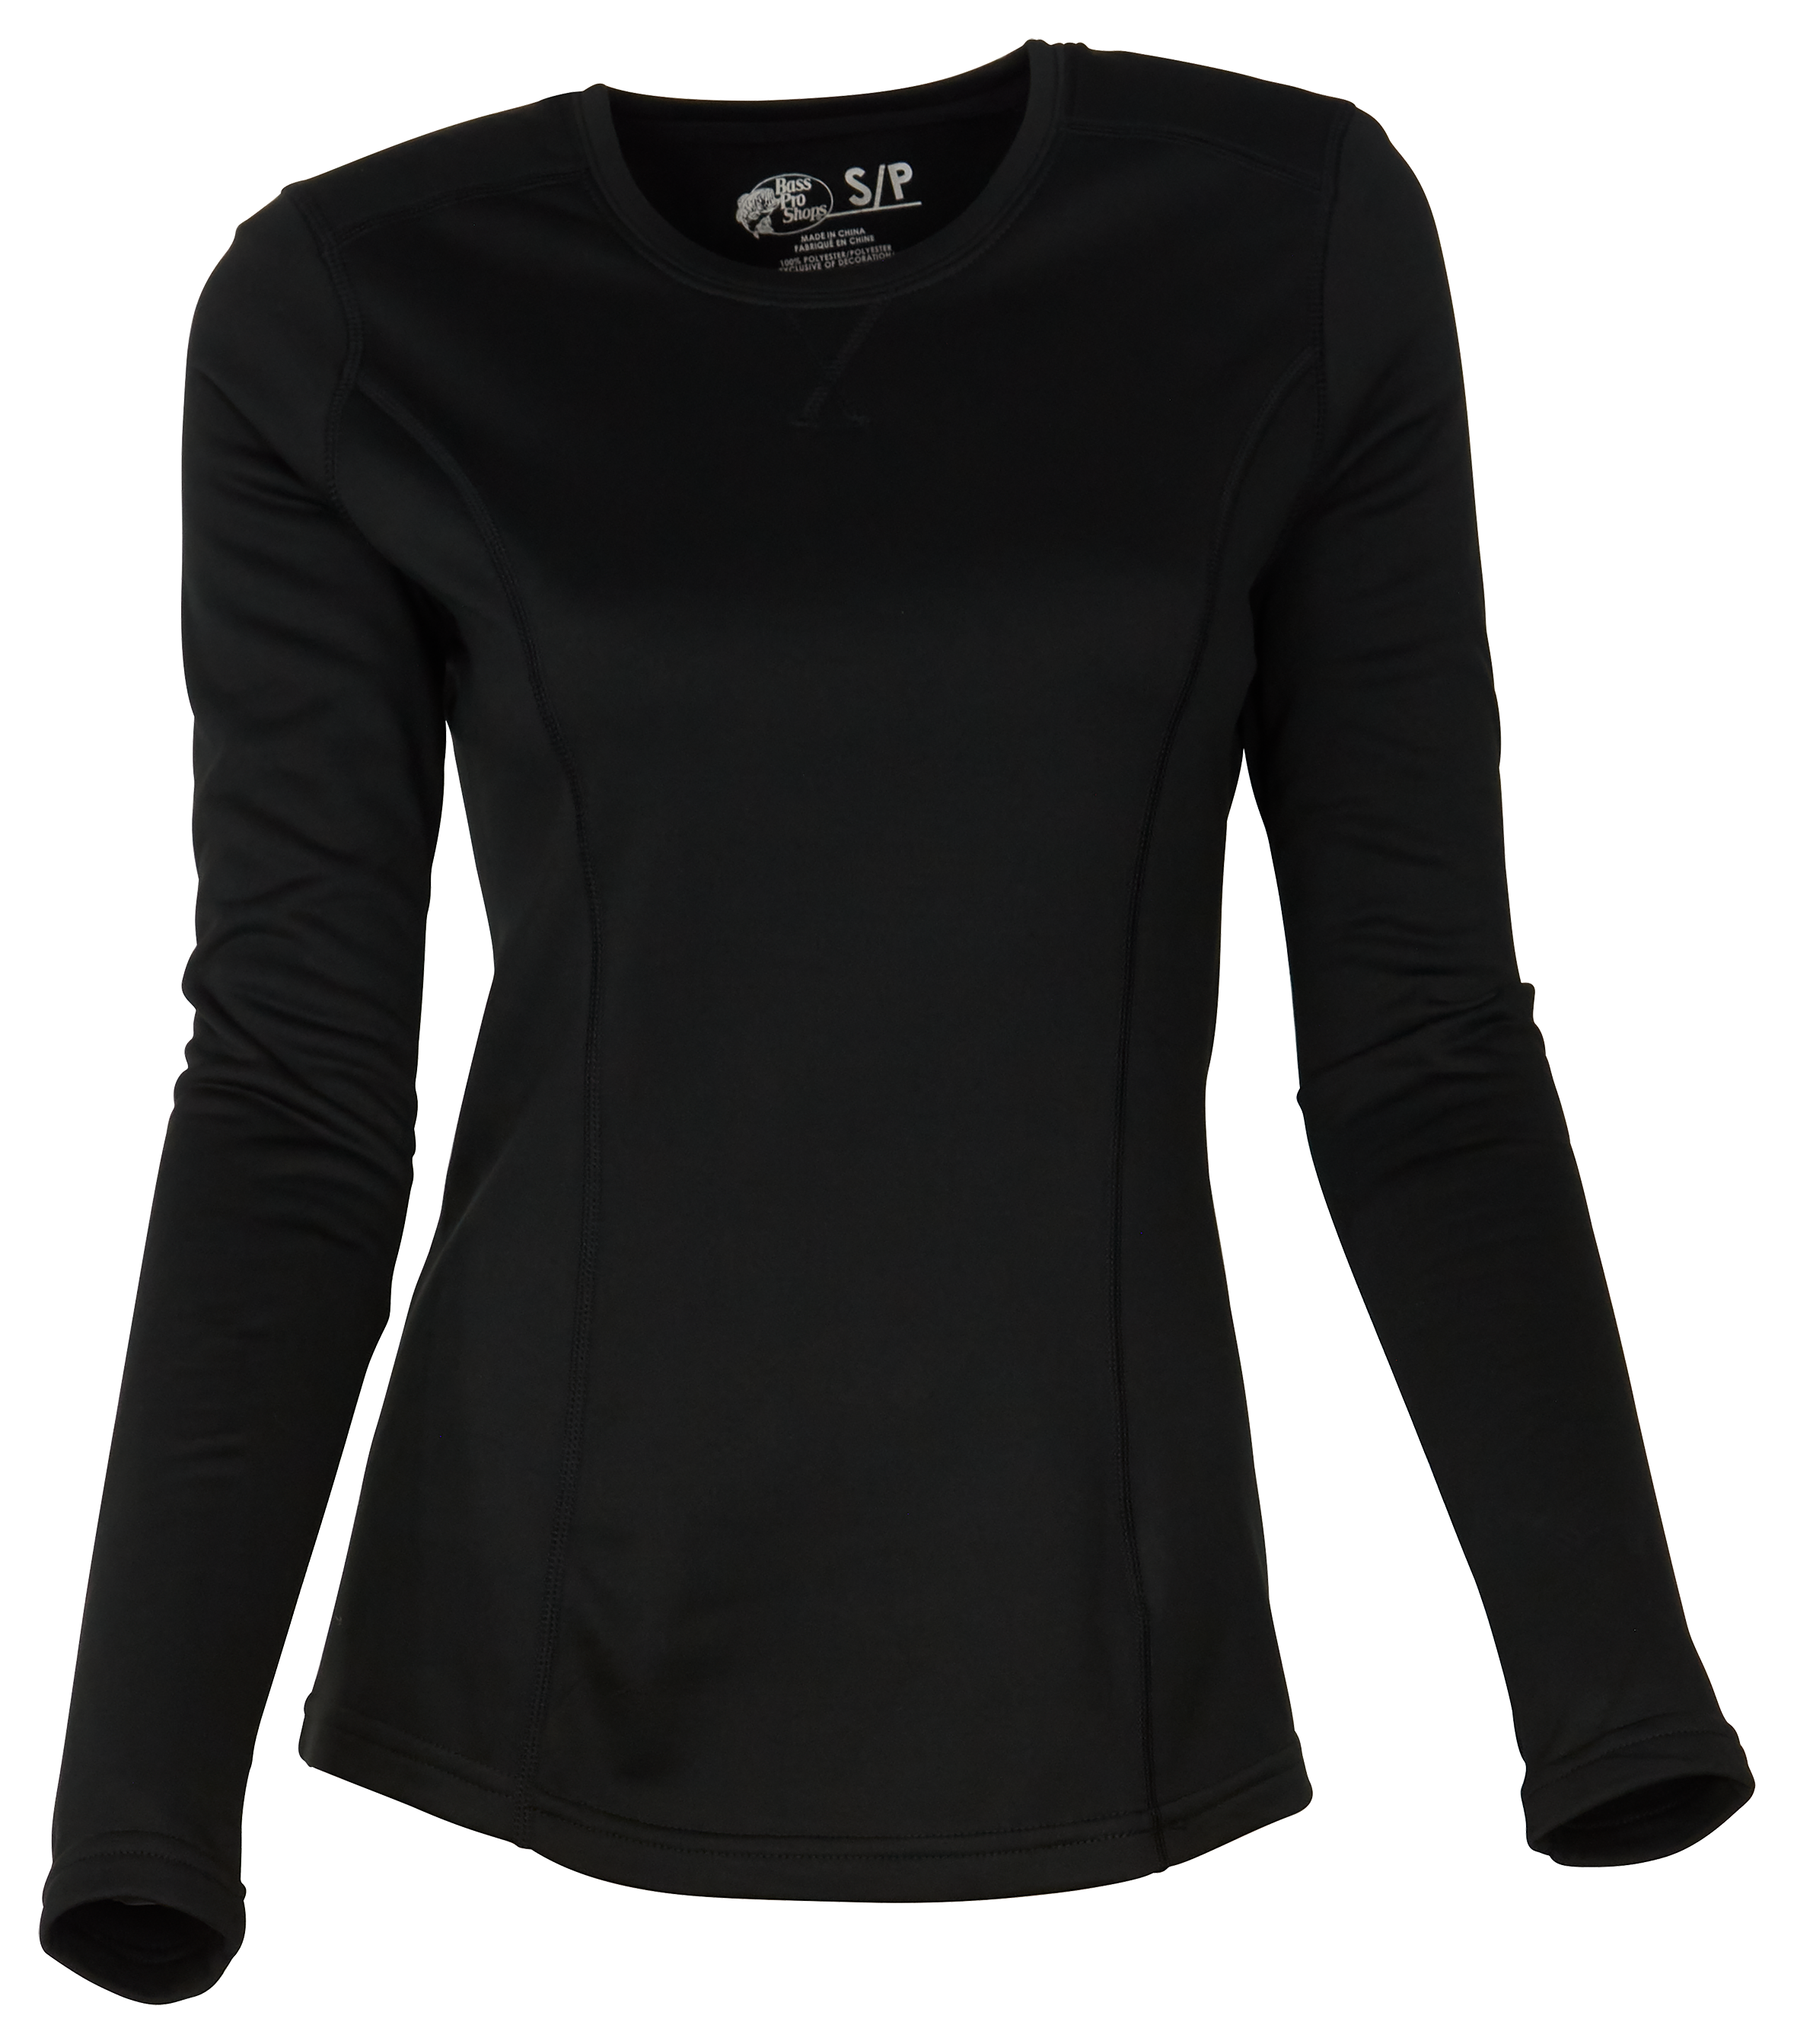 Bass Pro Shops Thermal Fleece Long-Sleeve Crew-Neck Top for Ladies